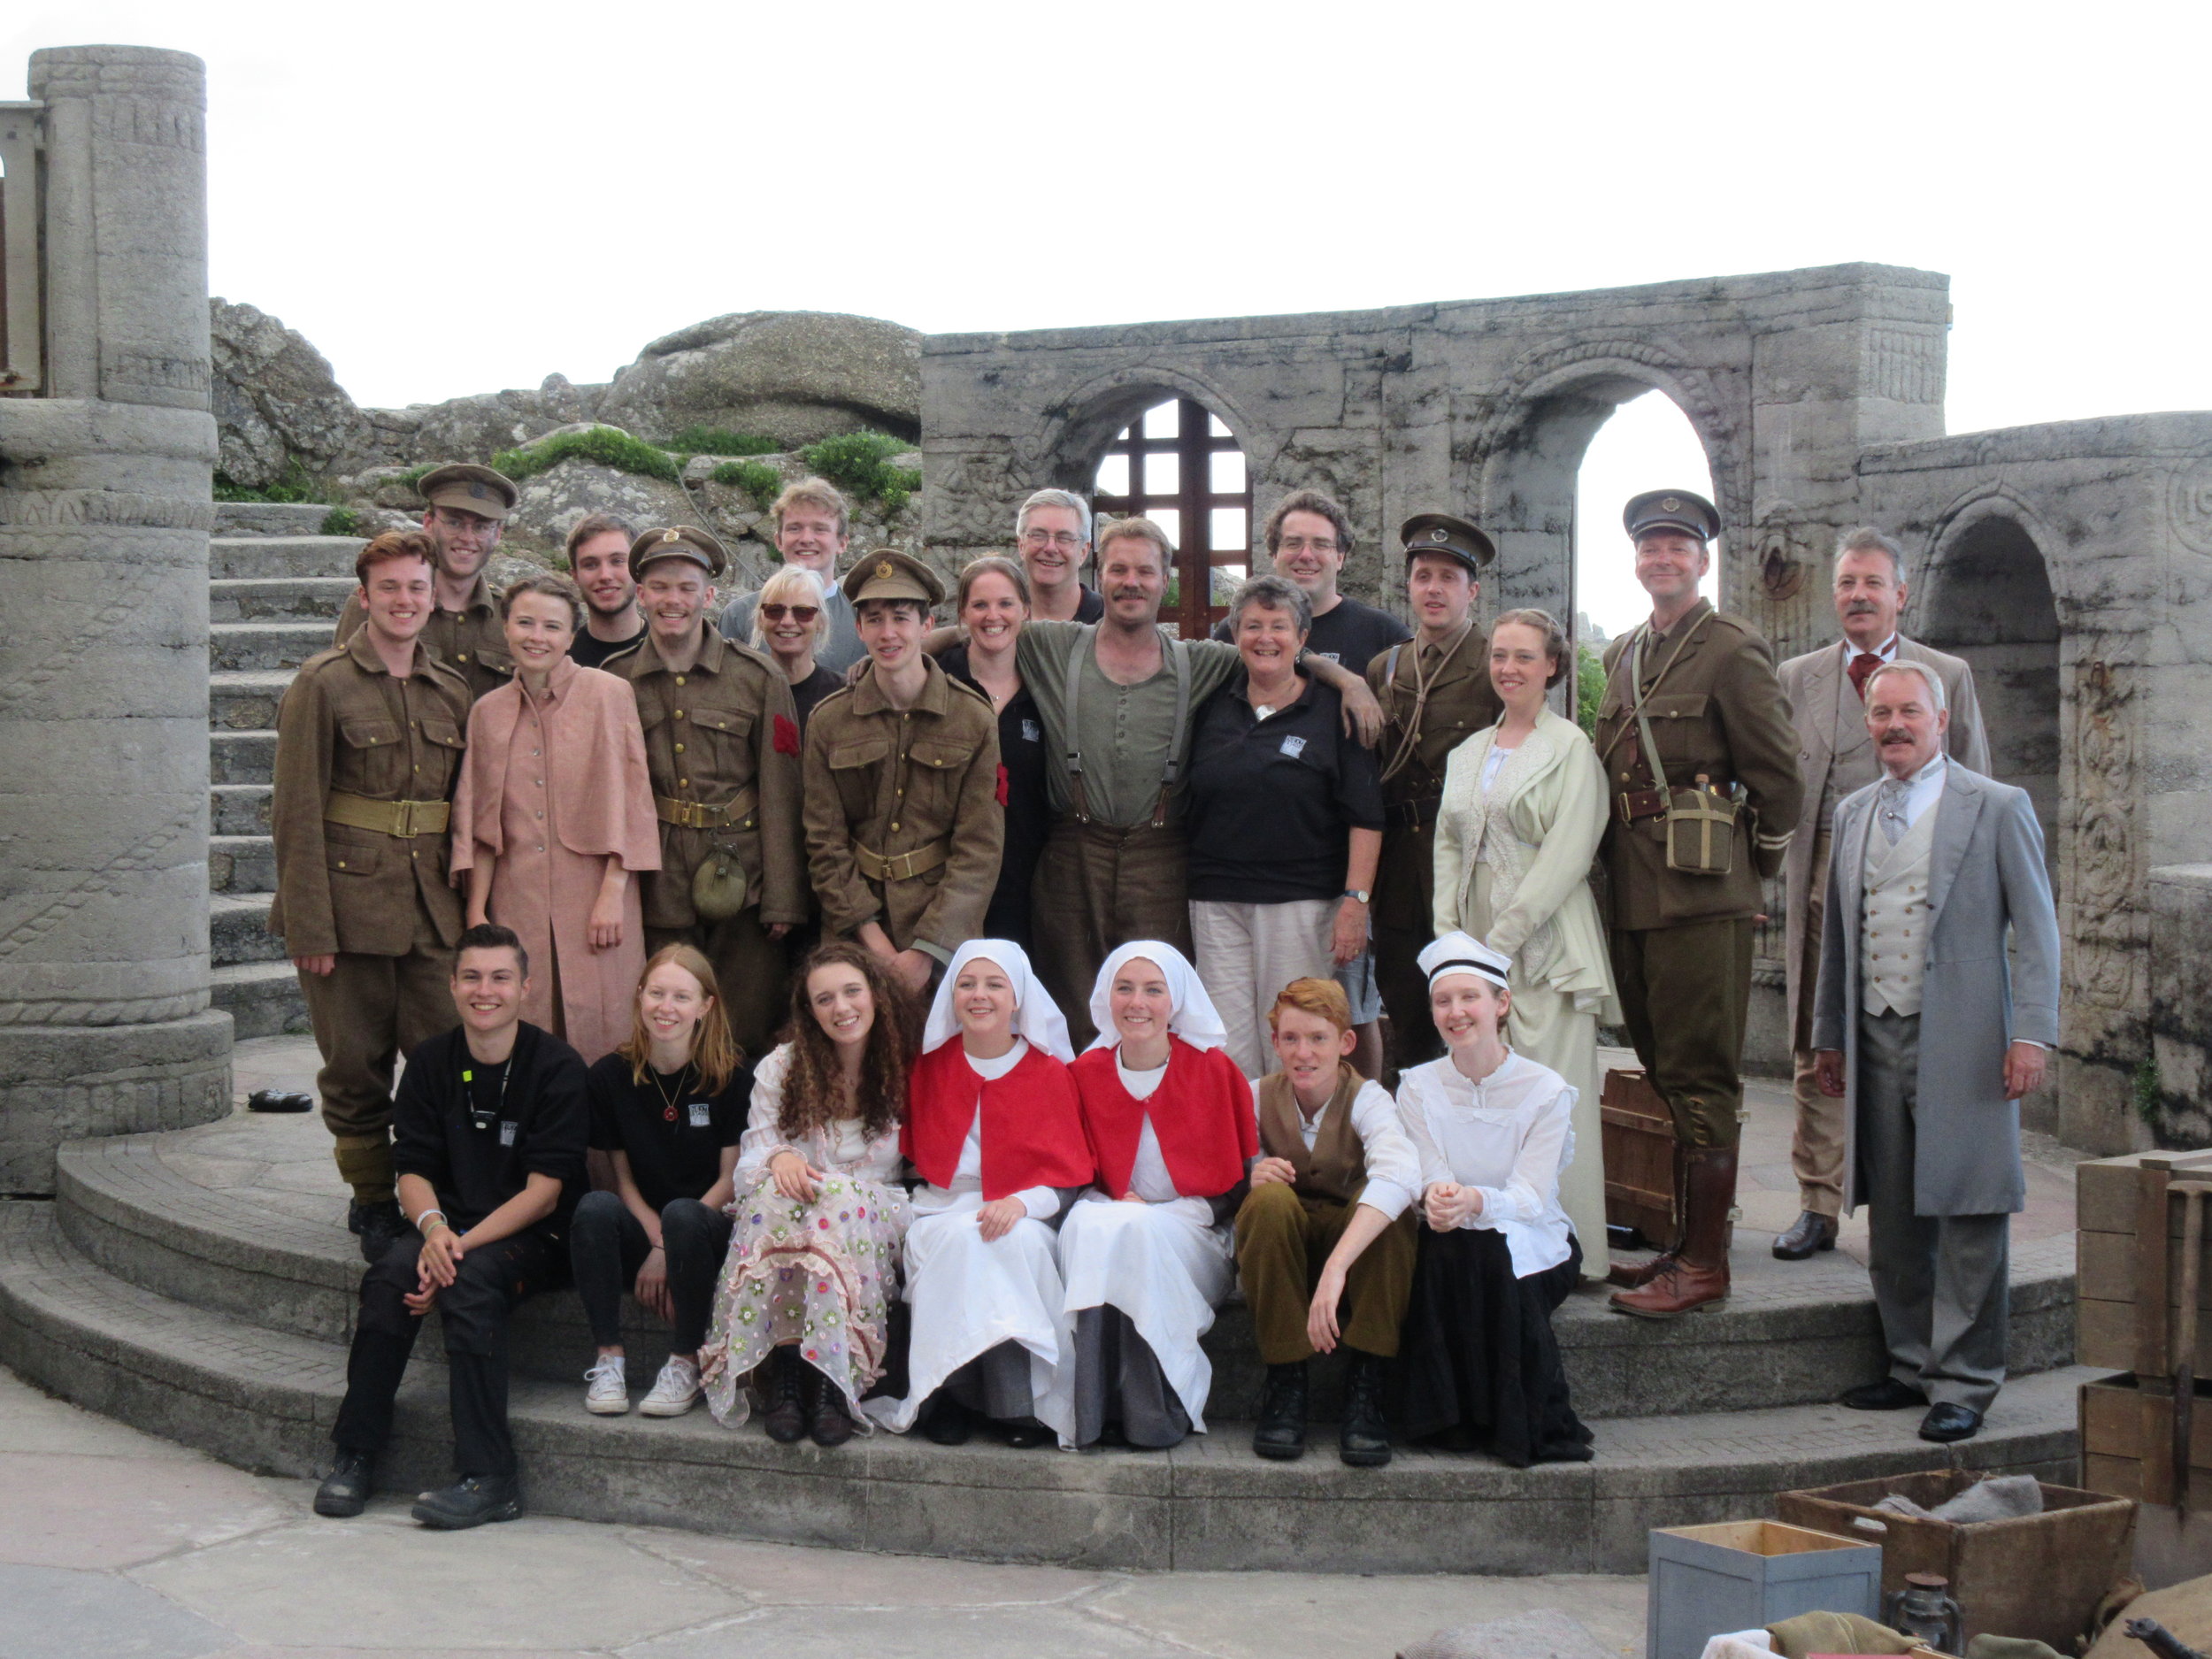 The cast and crew of Birdsong (2017)